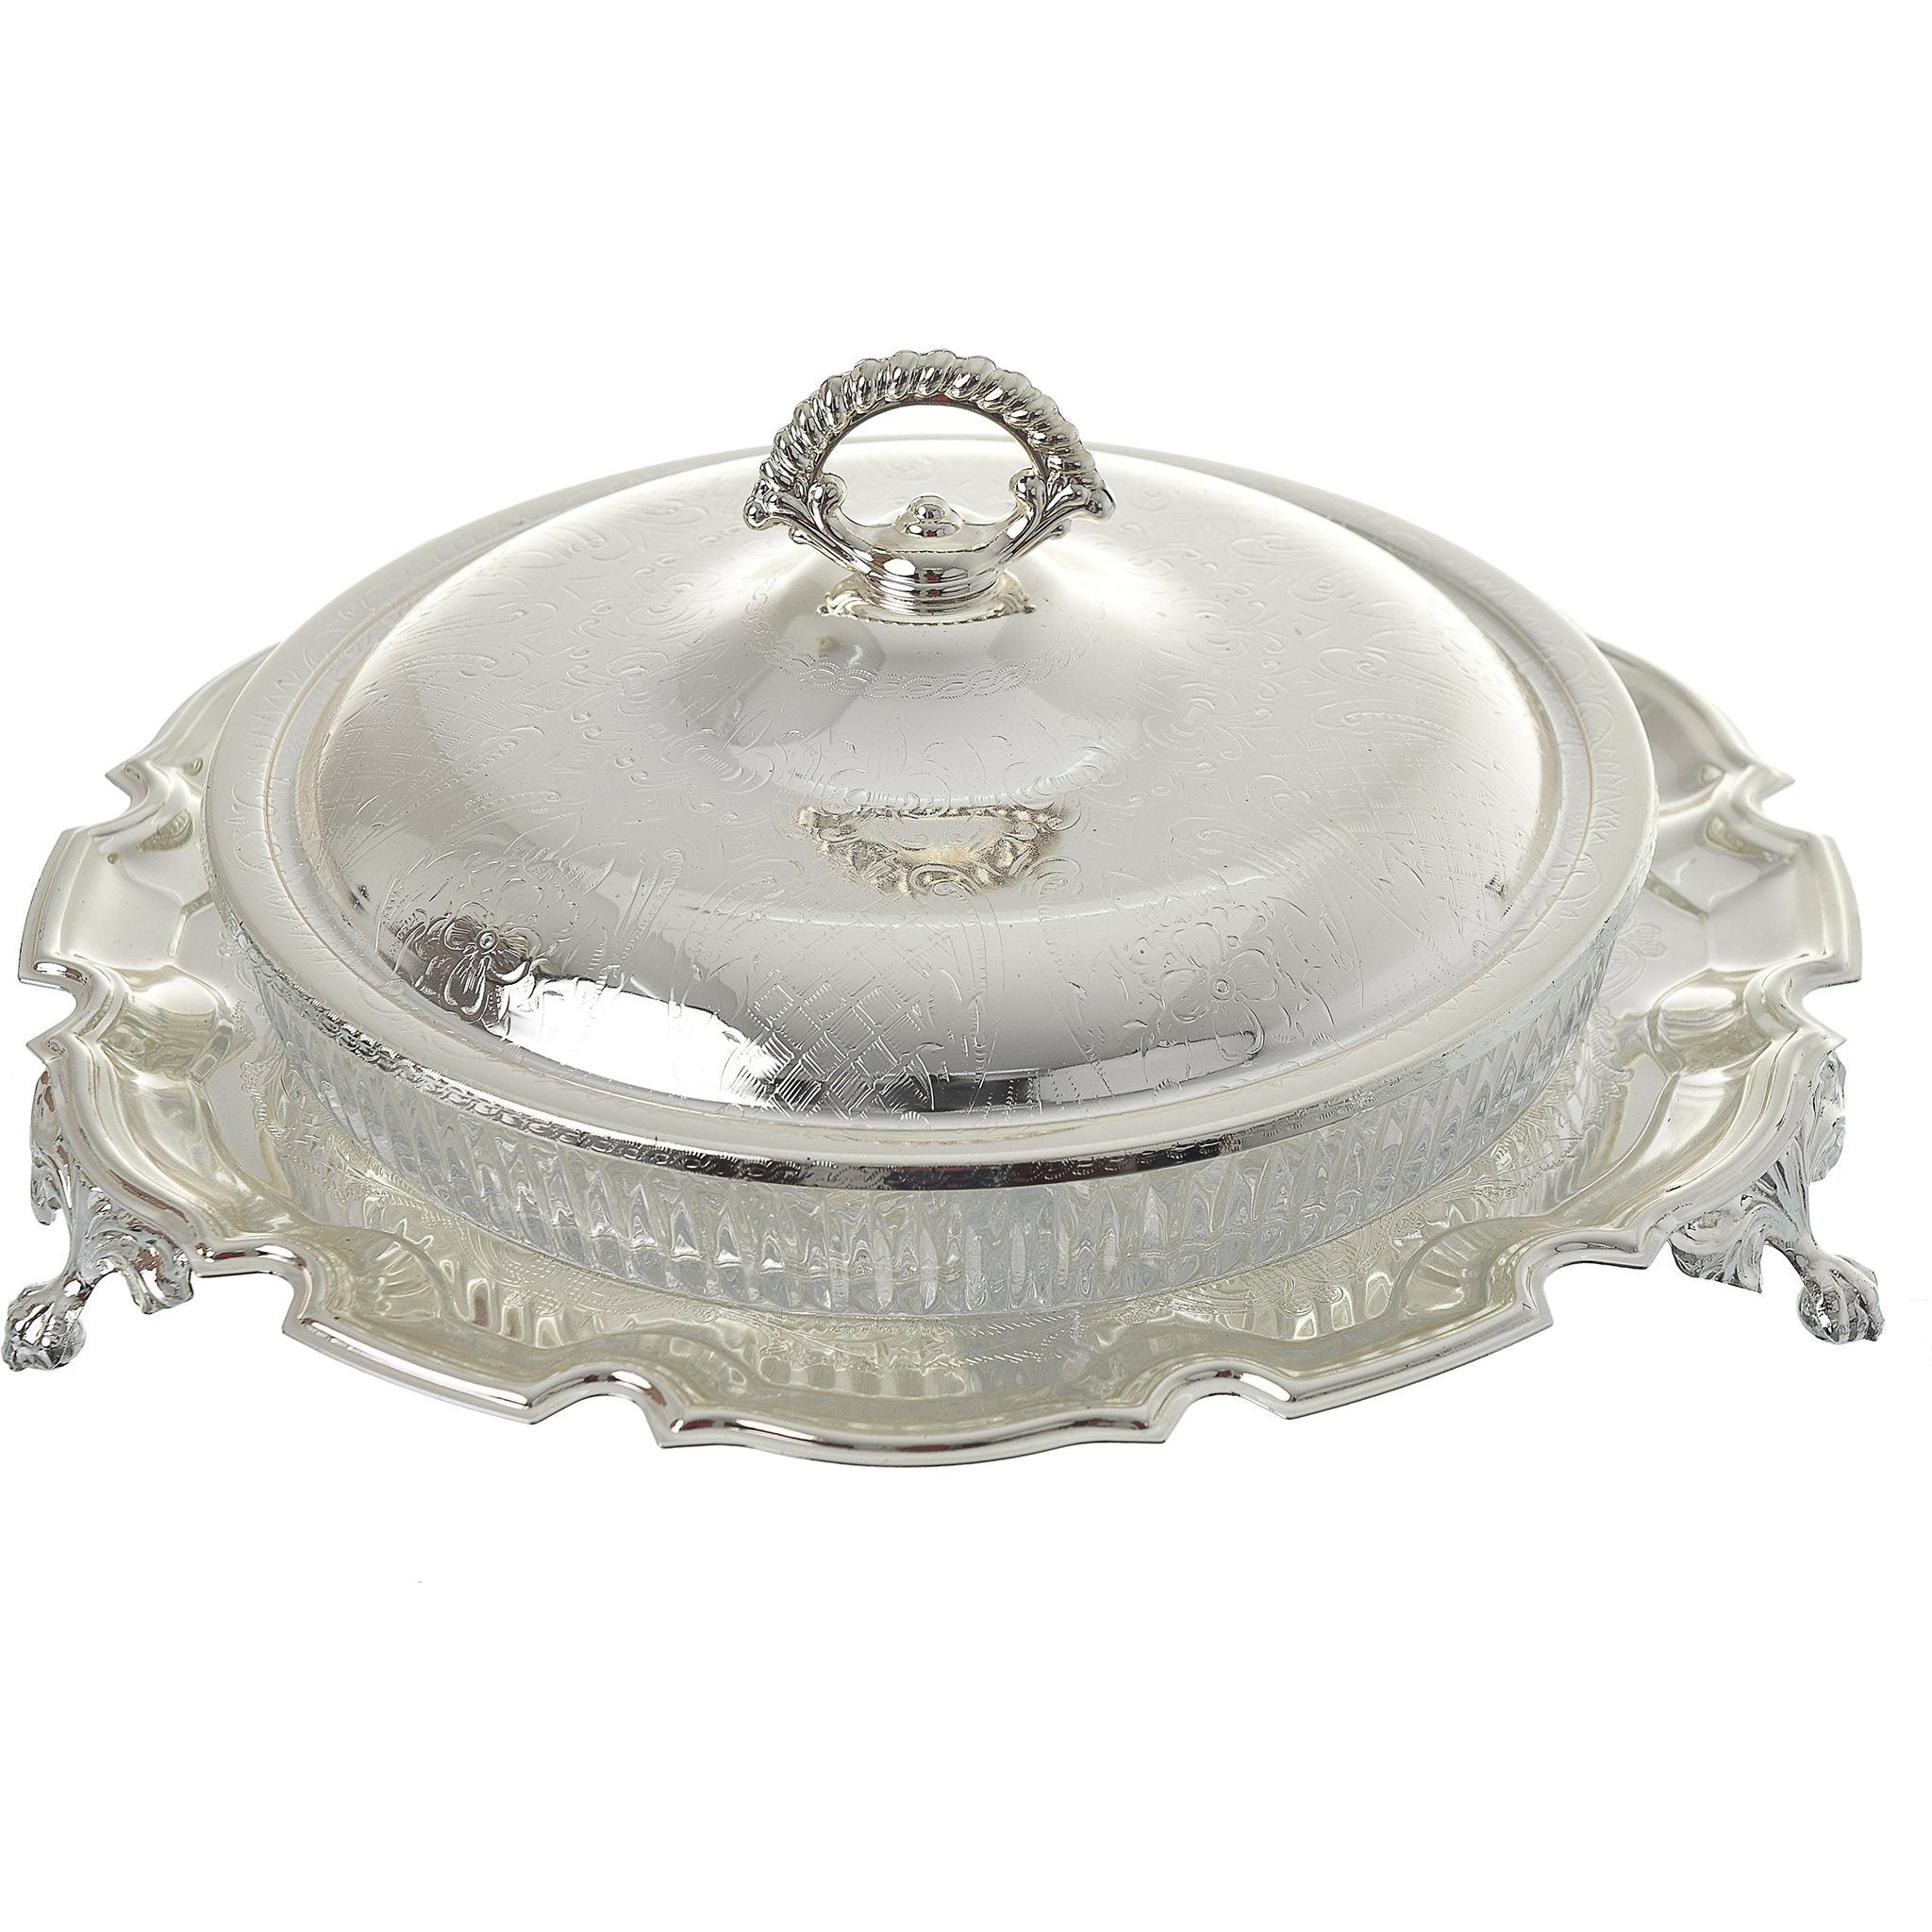 Queen Anne - Round Hors d'oeuvre 5 Parts with Silver Plated Cover & Stand - Silver Plated Metal & Glass - 25cm - 26000444